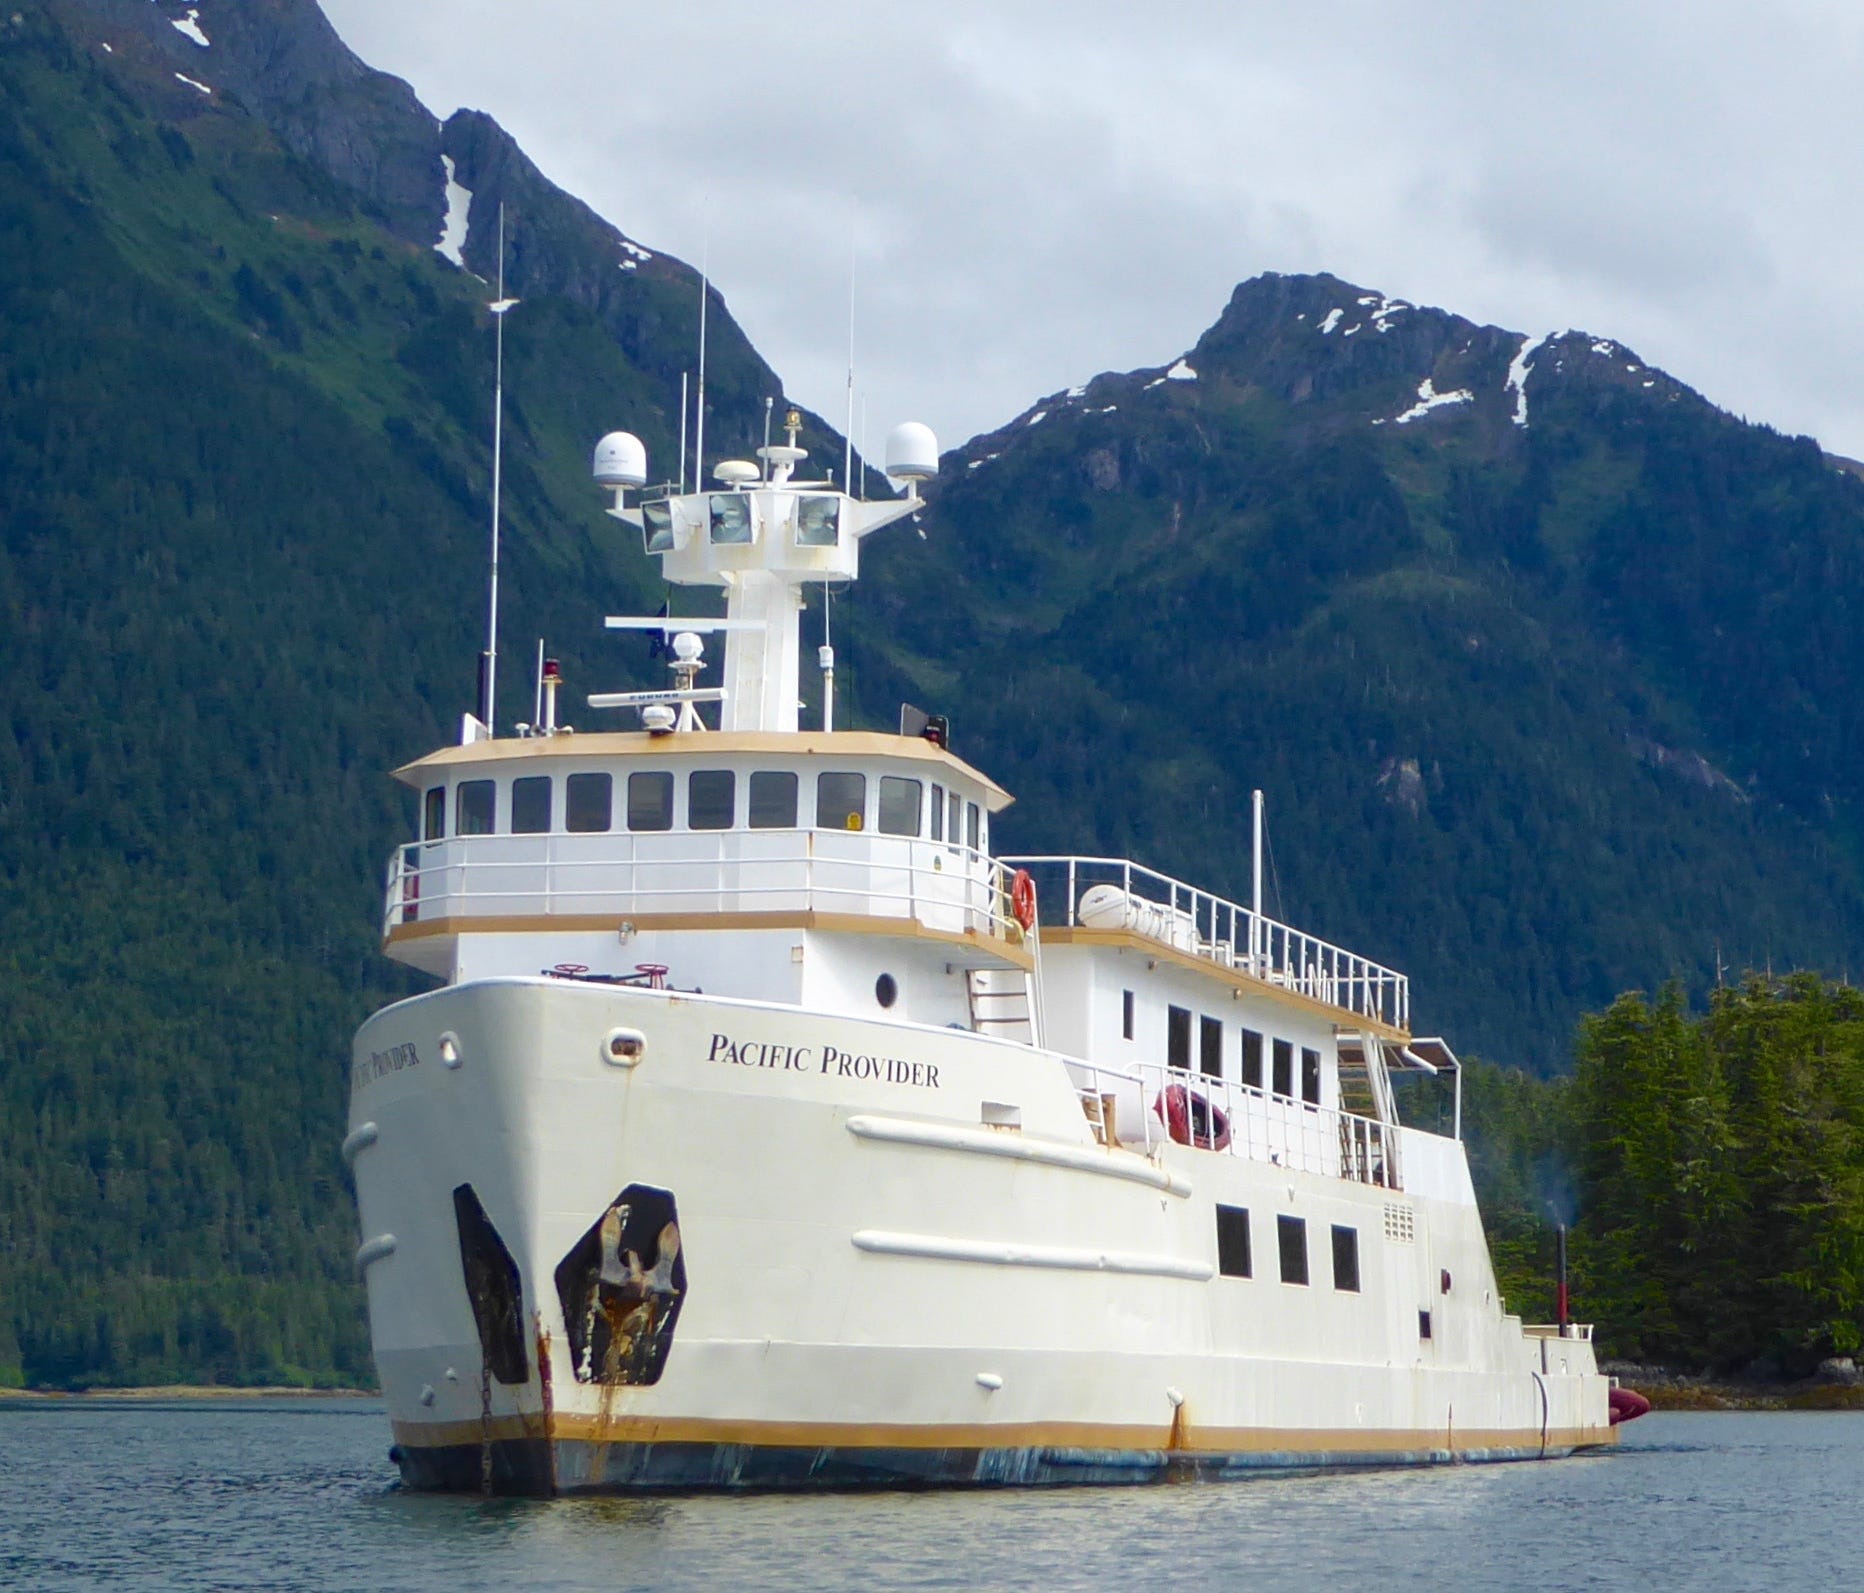 Introduced in late 2017, the Pacific Provider is an expedition yacht that is owned and operated by Offshore Outpost Expeditions.